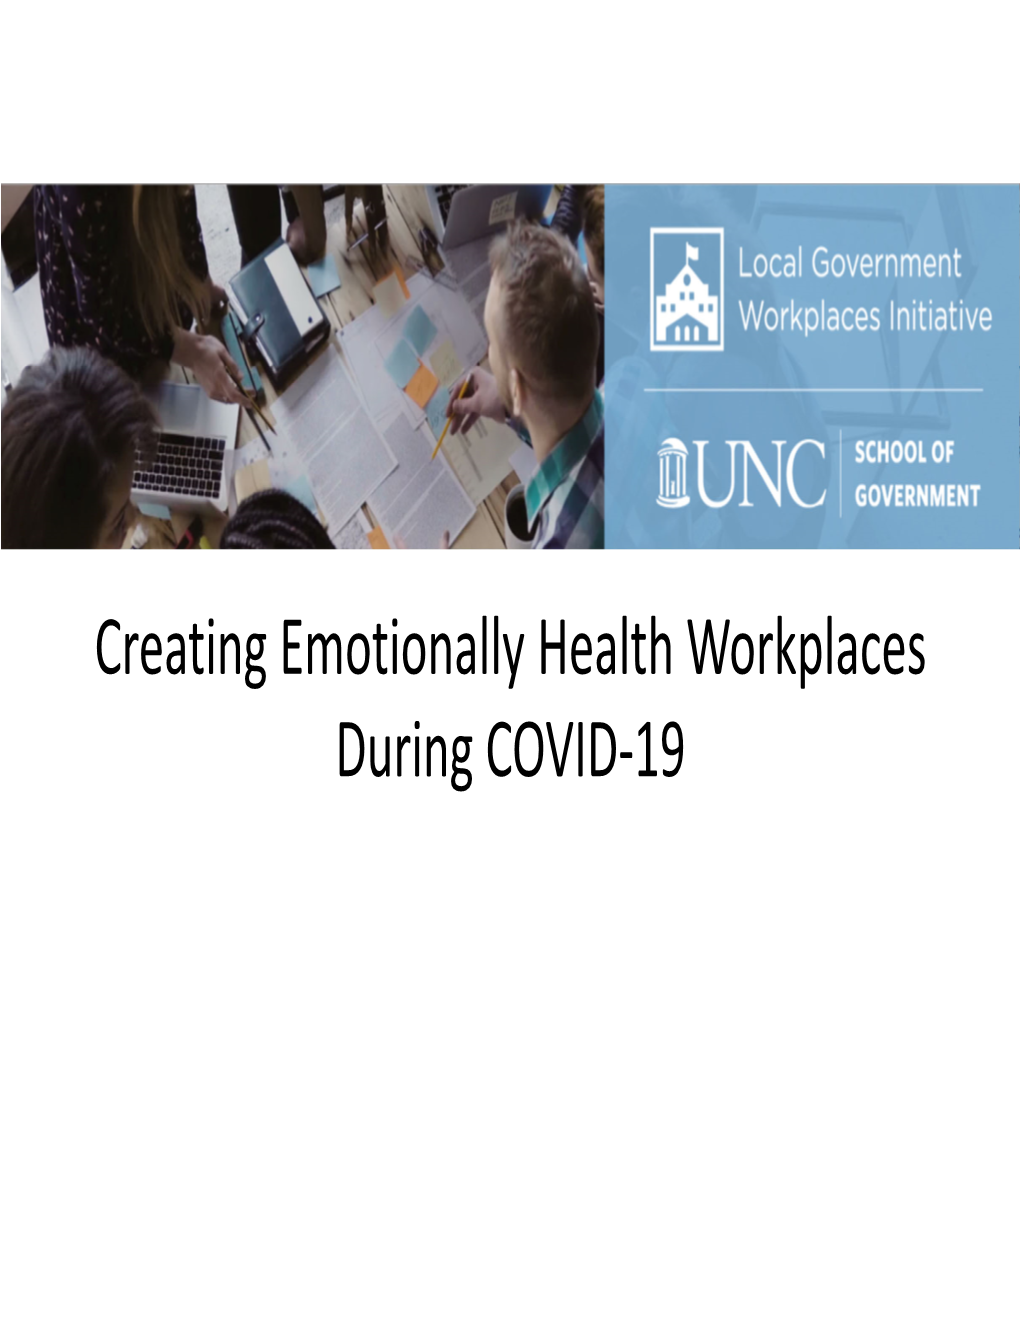 Creating Emotionally Health Workplaces During COVID-19